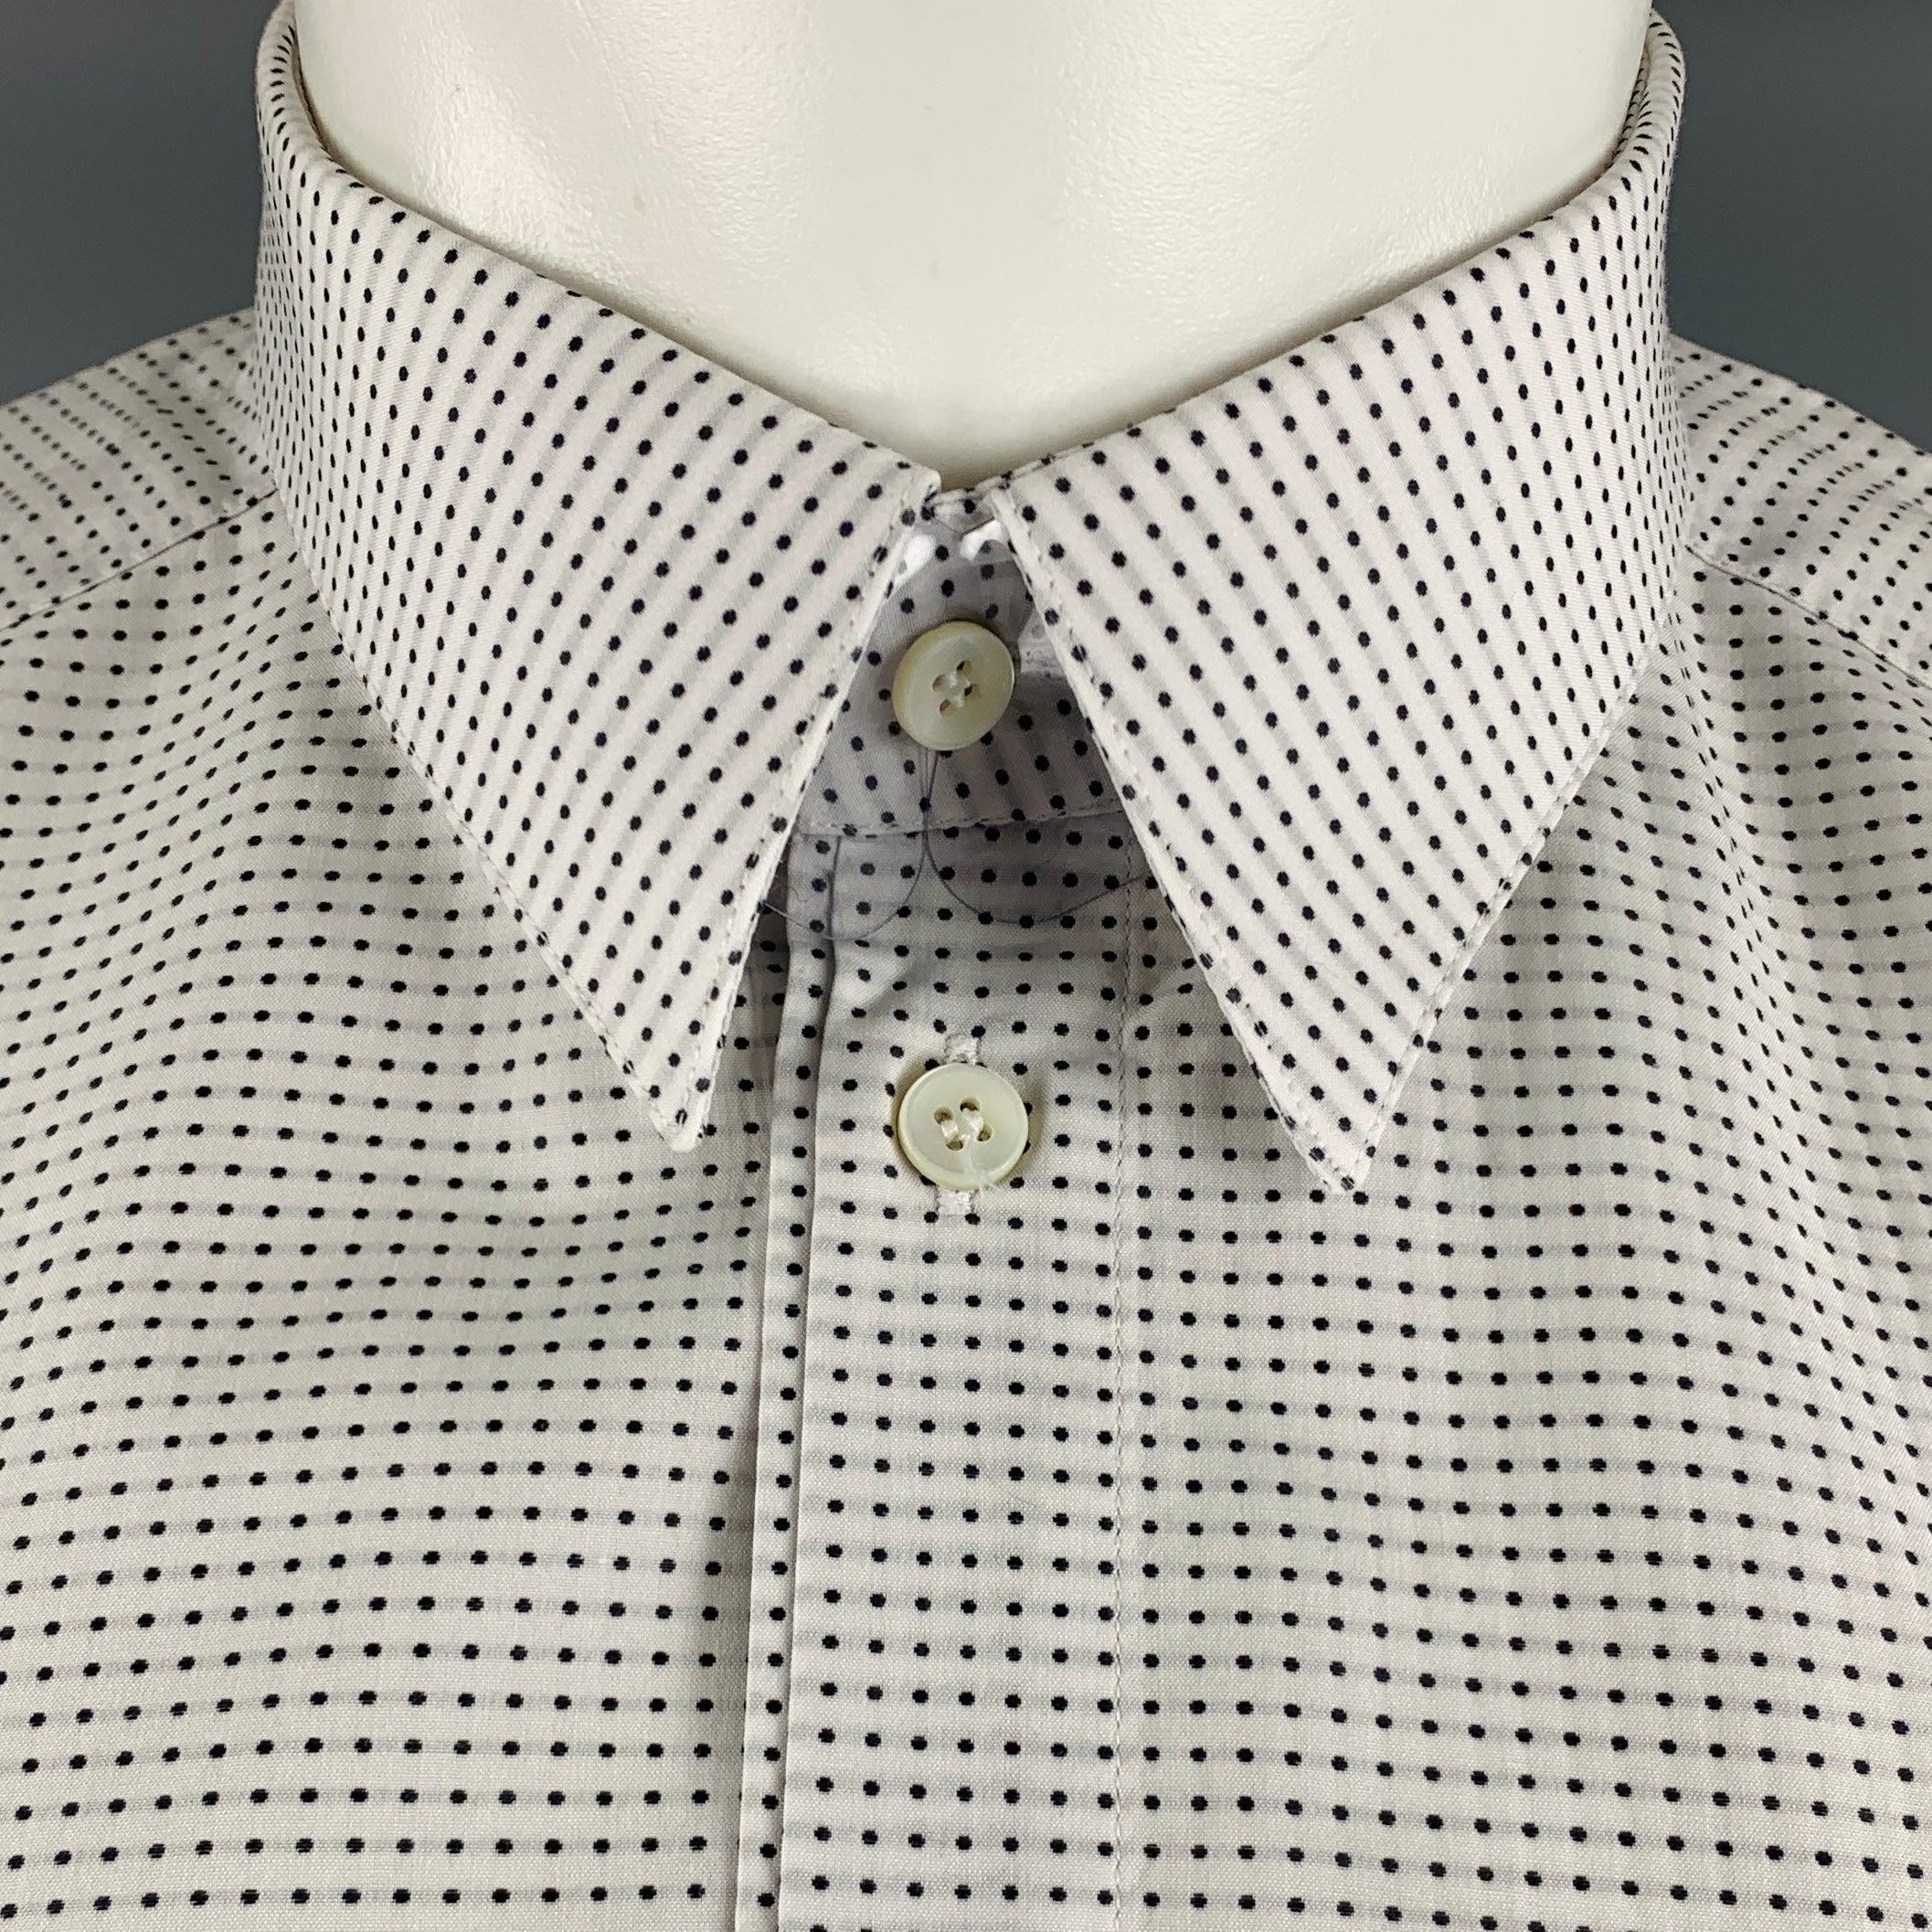 DOLCE & GABBANA long sleeve shirt in a white and grey cotton fabric featuring dots pattern, spread collar, and button closure. Made in Italy.Excellent Pre-Owned Condition. 

Marked:   16/41 

Measurements: 
 
Shoulder: 15.5 inches Chest: 40 inches